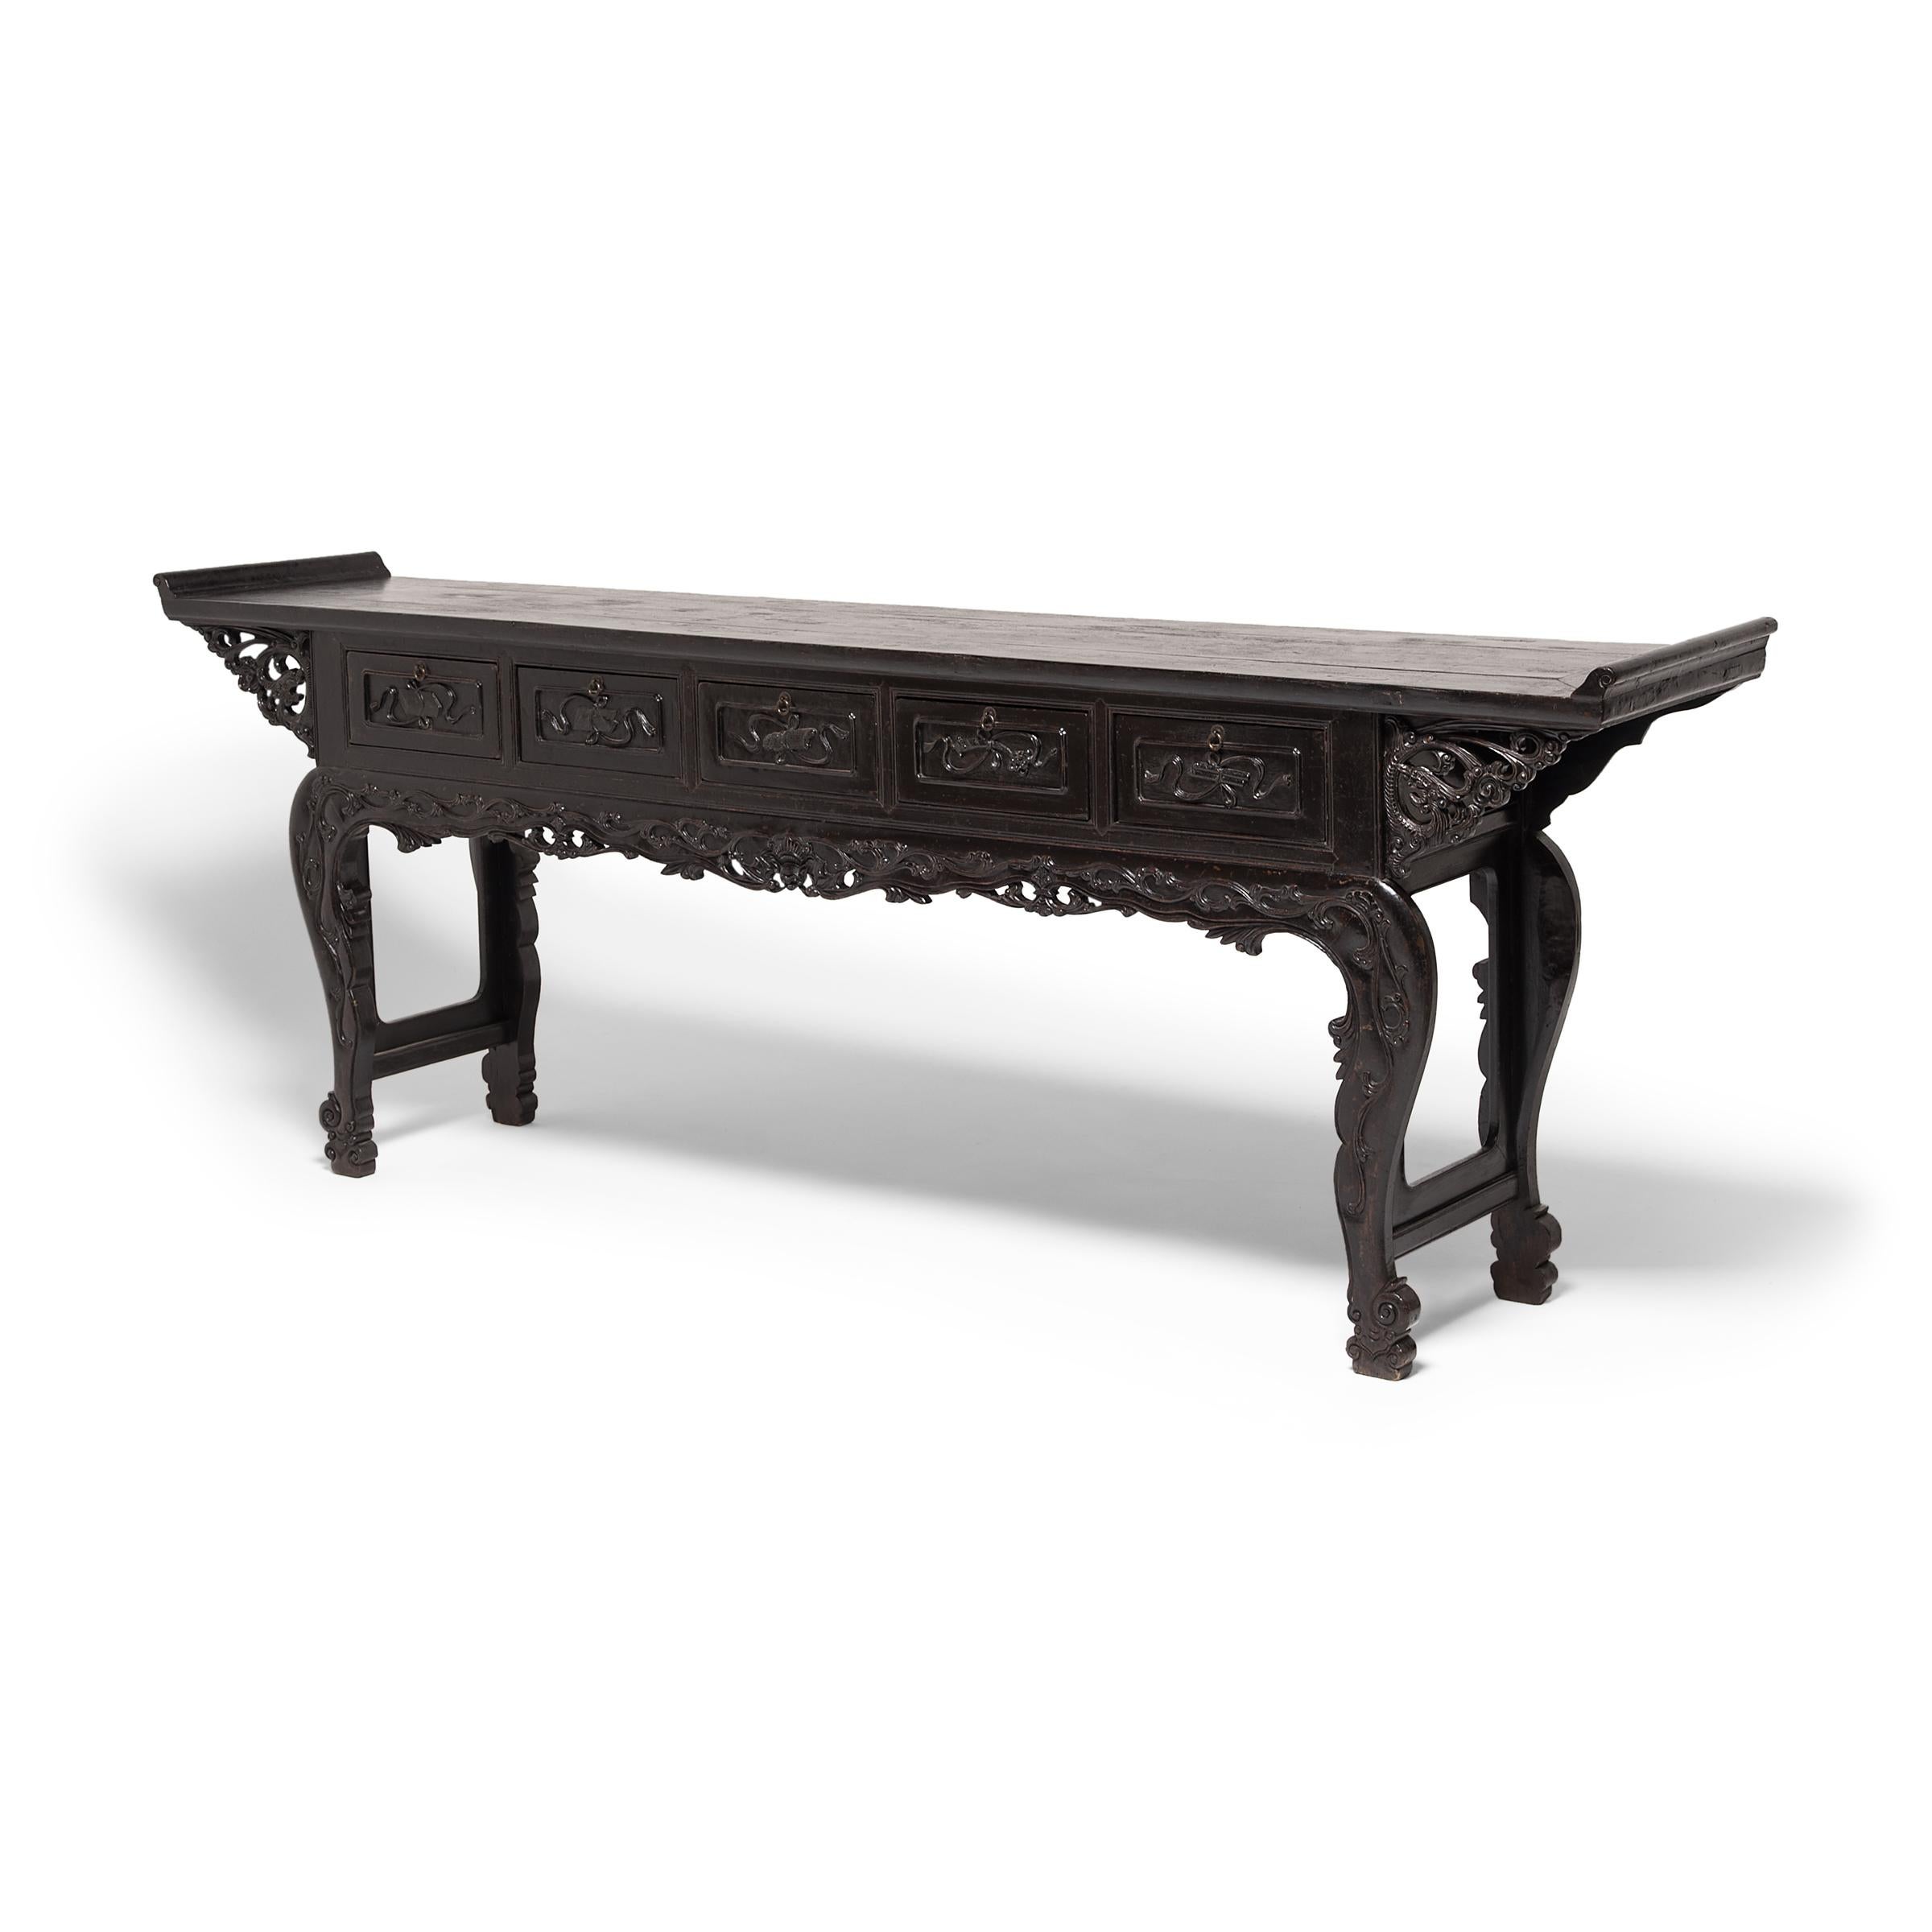 Altar tables with everted ends seen in Chinese paintings and prints are typically depicted in a grand context, and so it is thought that the upward-ending surface signifies status and power. This ornate 19th century console table has five drawers